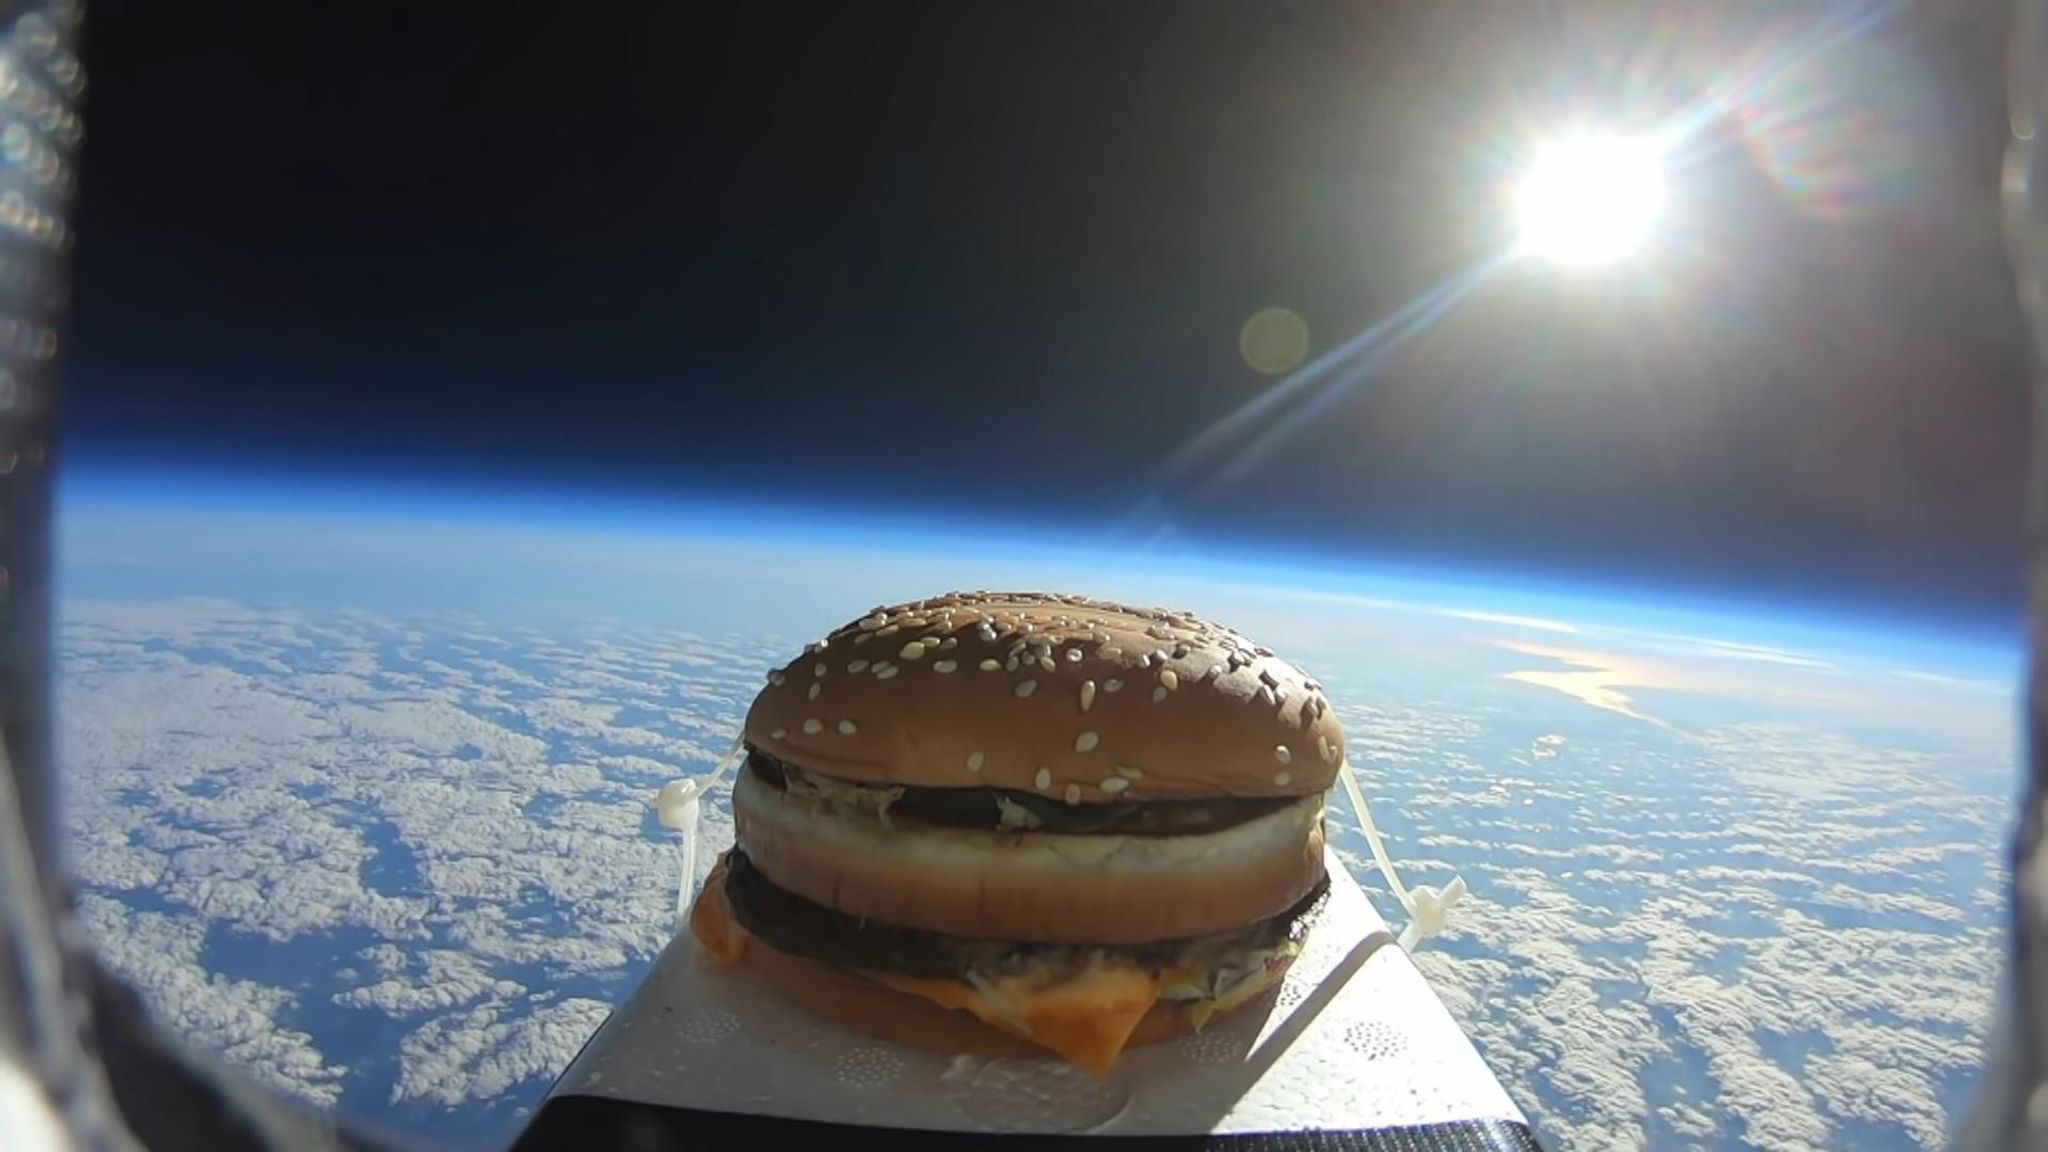 Space burger lands at Colchester United's training ground UK News